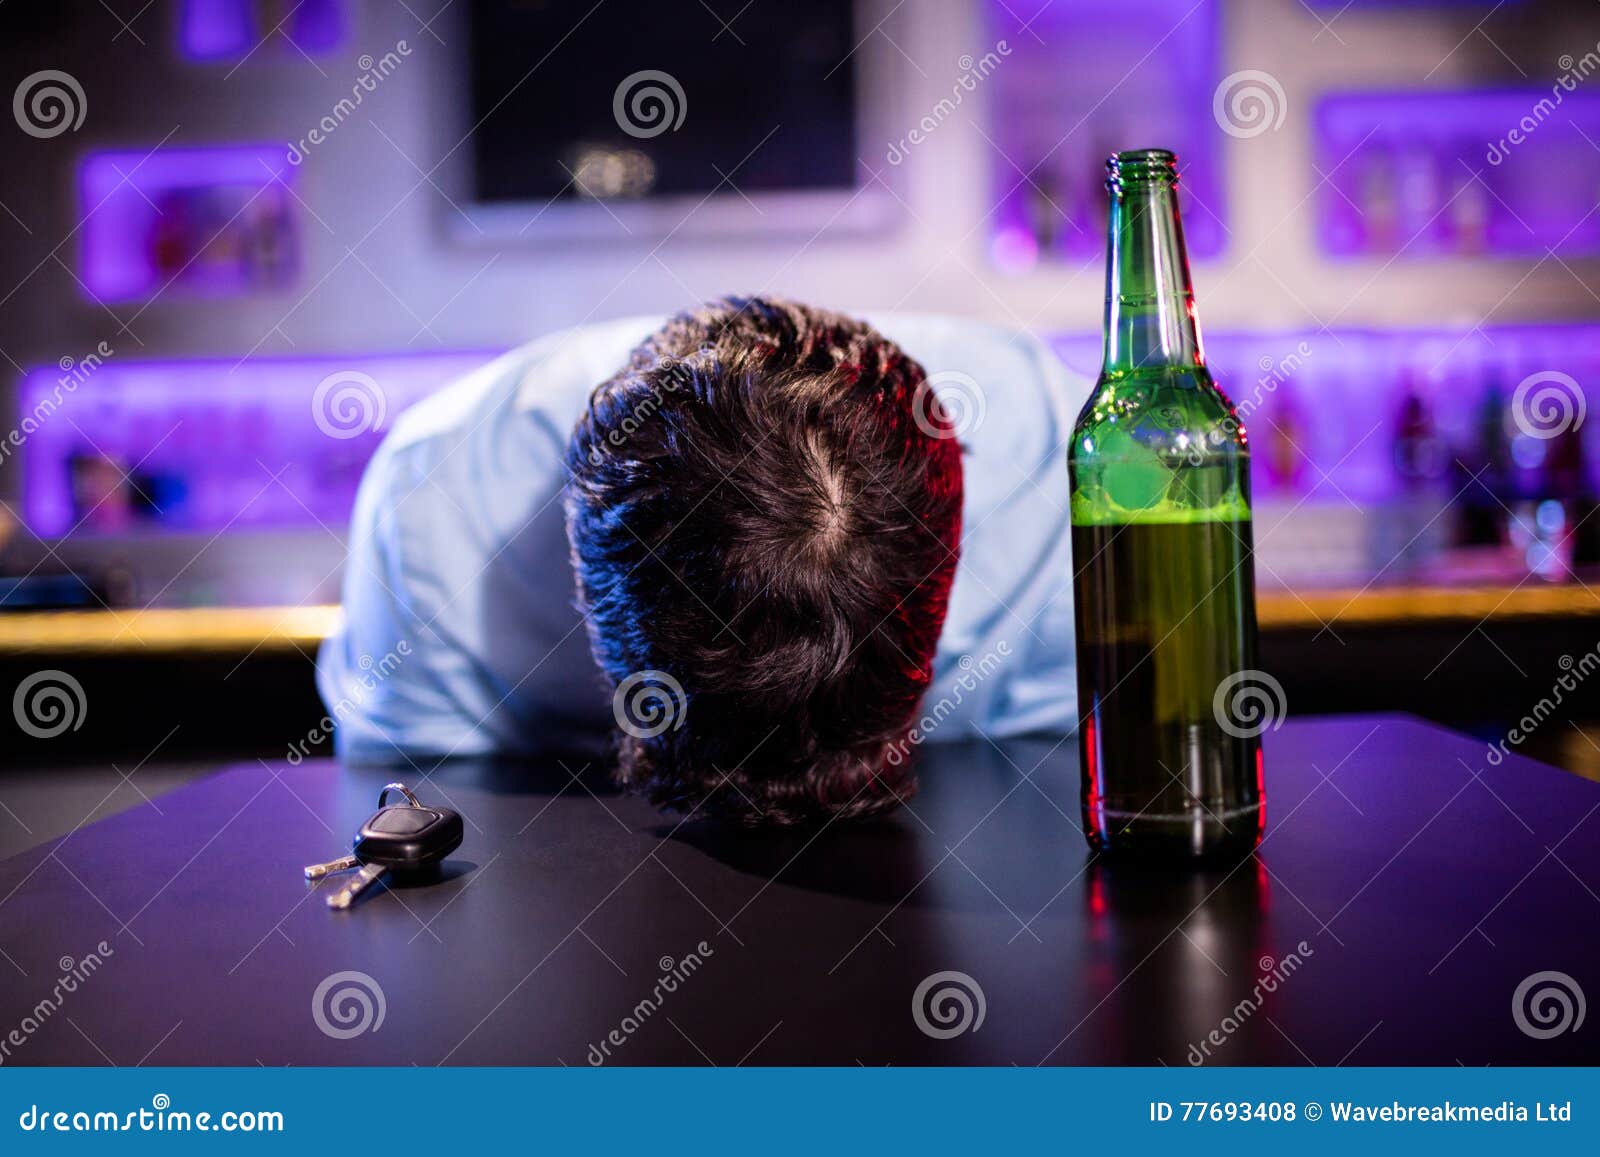 Depressed Drunk Man Sleeping with His Head on the Table Stock Photo ...